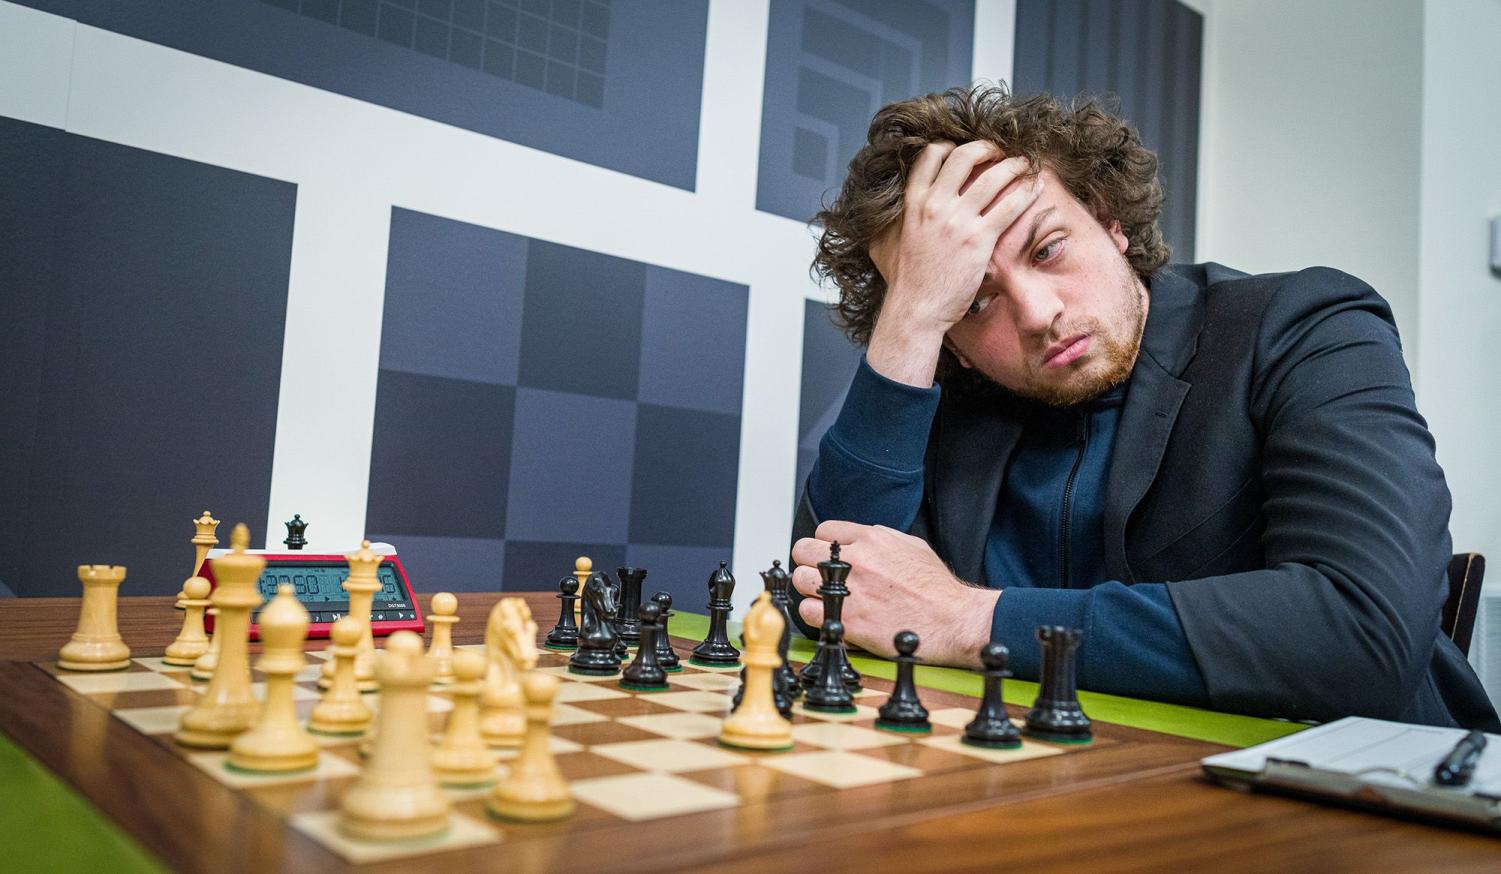 Hans Niemann Is the Bad Boy of Chess. But Did He Cheat? - The New York Times